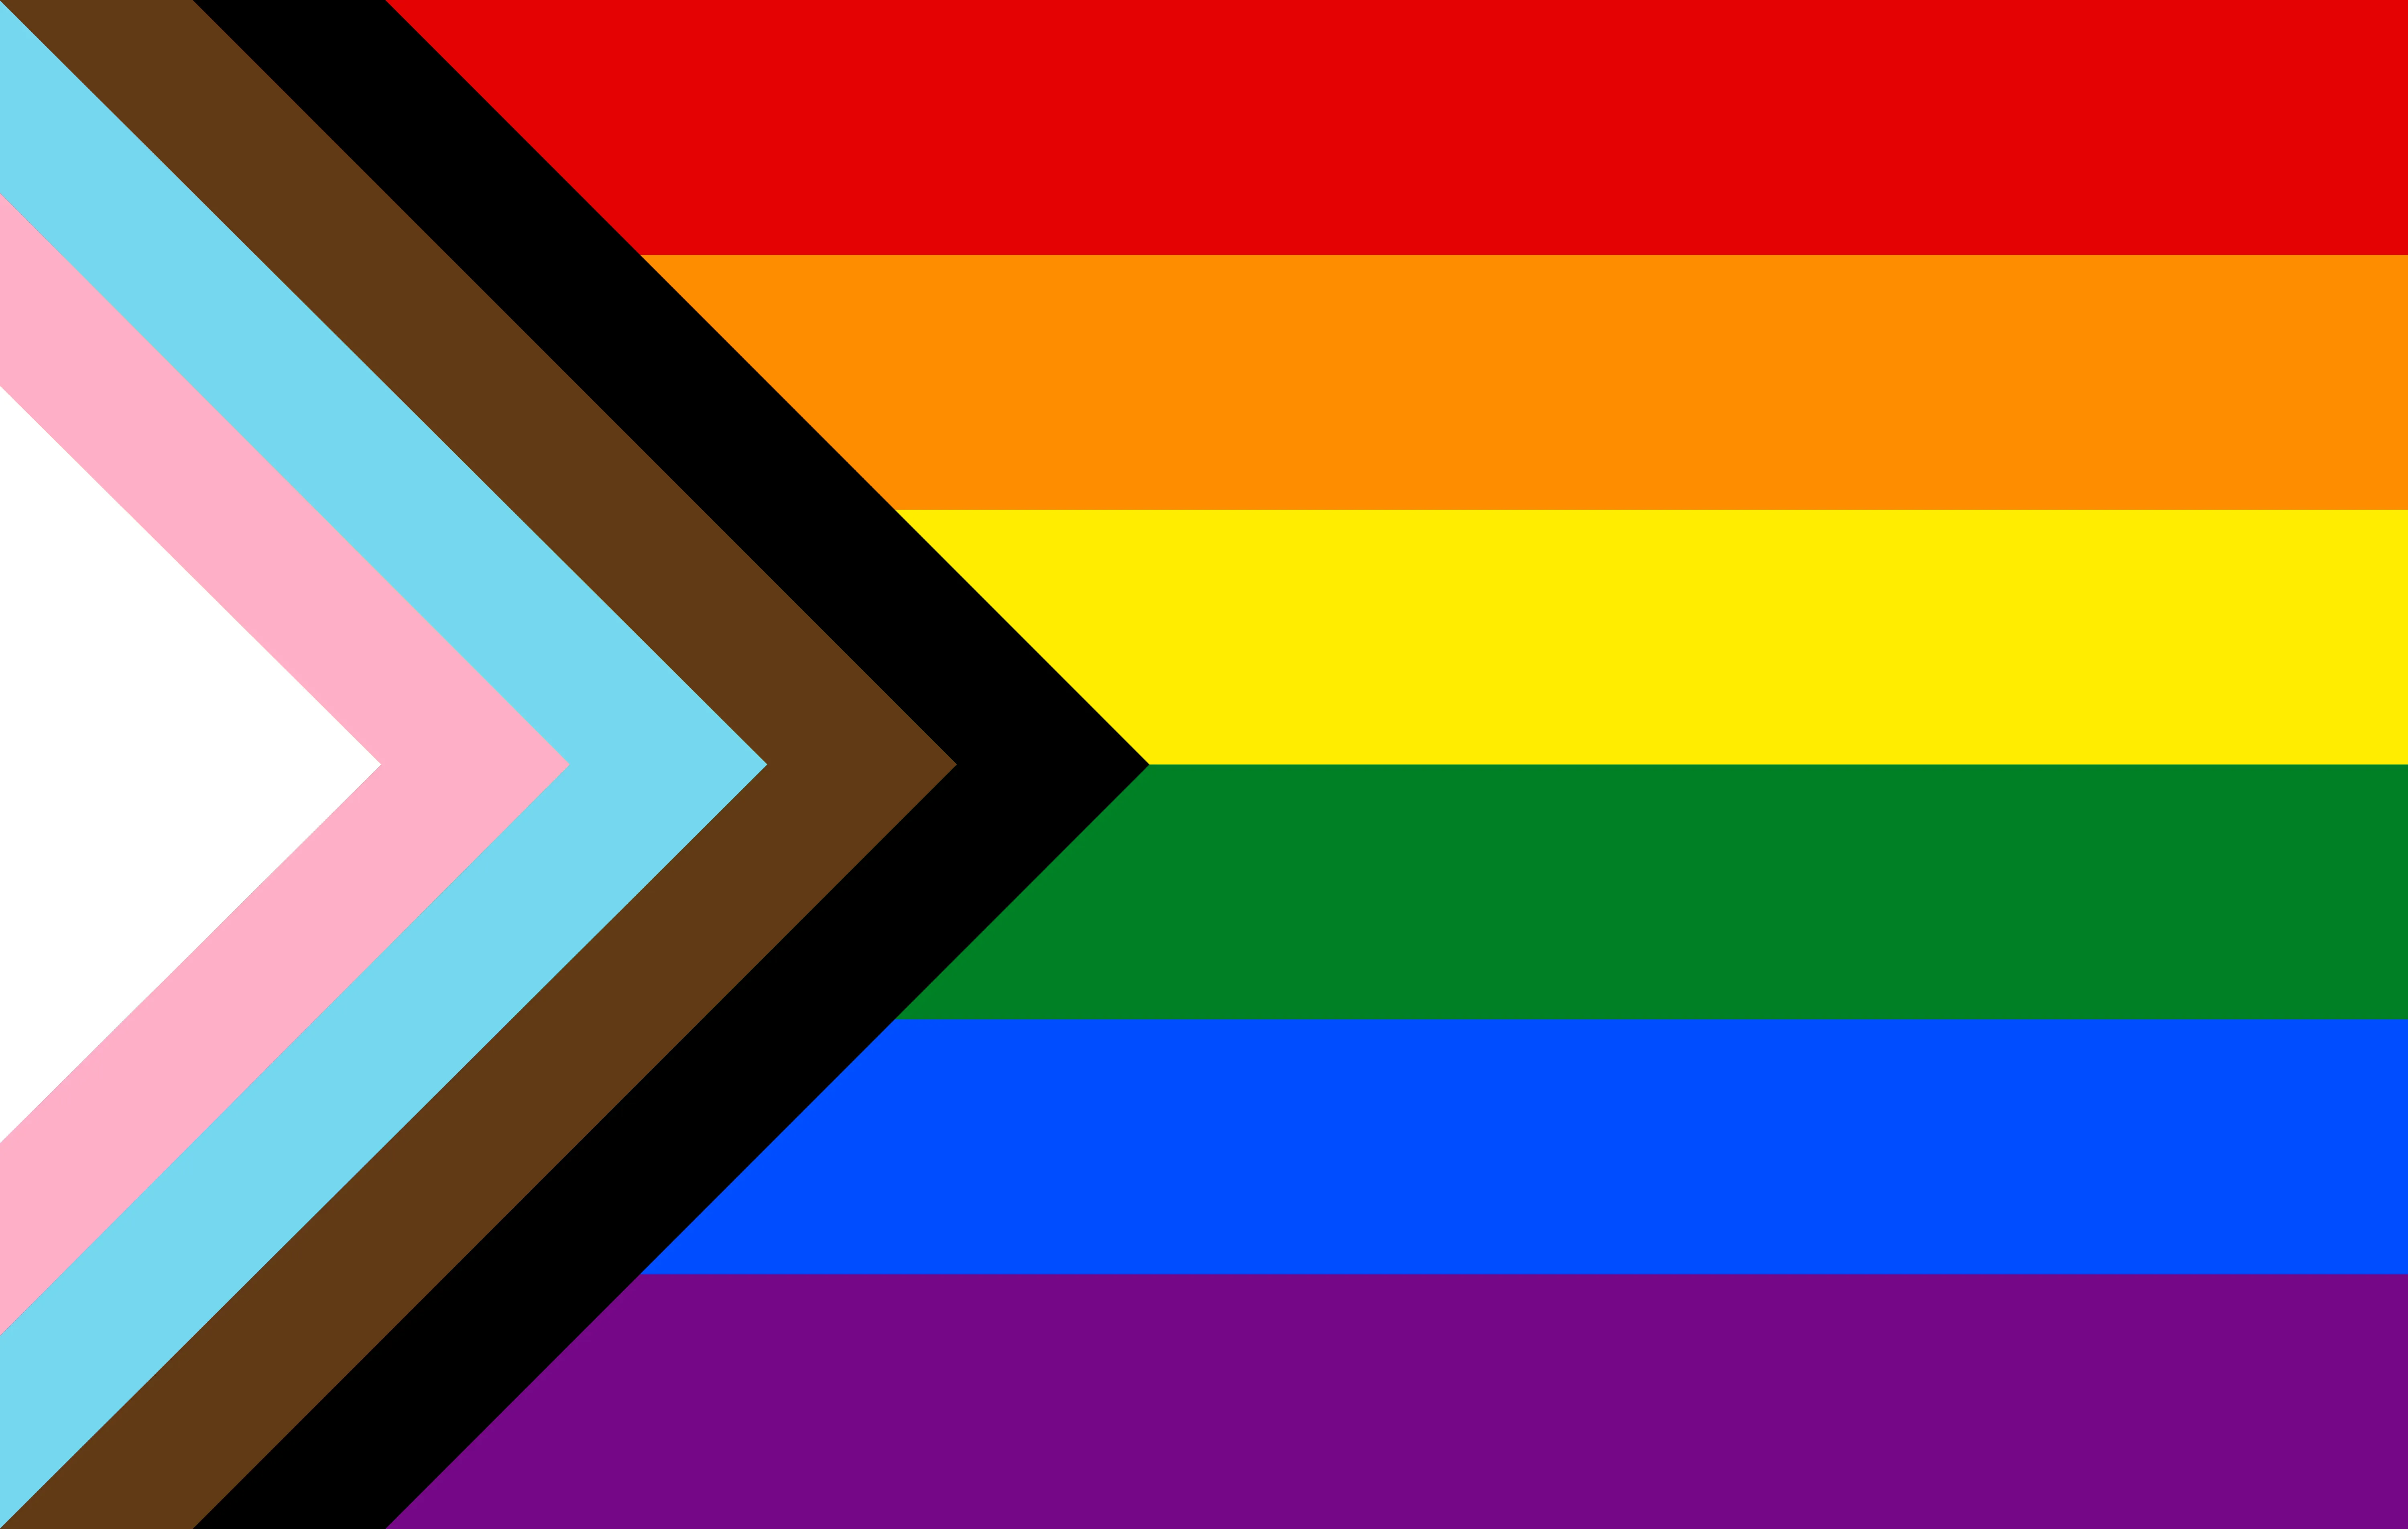 The progress pride flag. A field of six horizontal, coloured stripes (from top to bottom: red, orange, yellow, green, blue, and purple) is overlapped on the left-hand side by a right-pointing arrowhead, itself composed of five coloured stripes (from left to right: white, pastel pink, pastel blue, brown, and black).